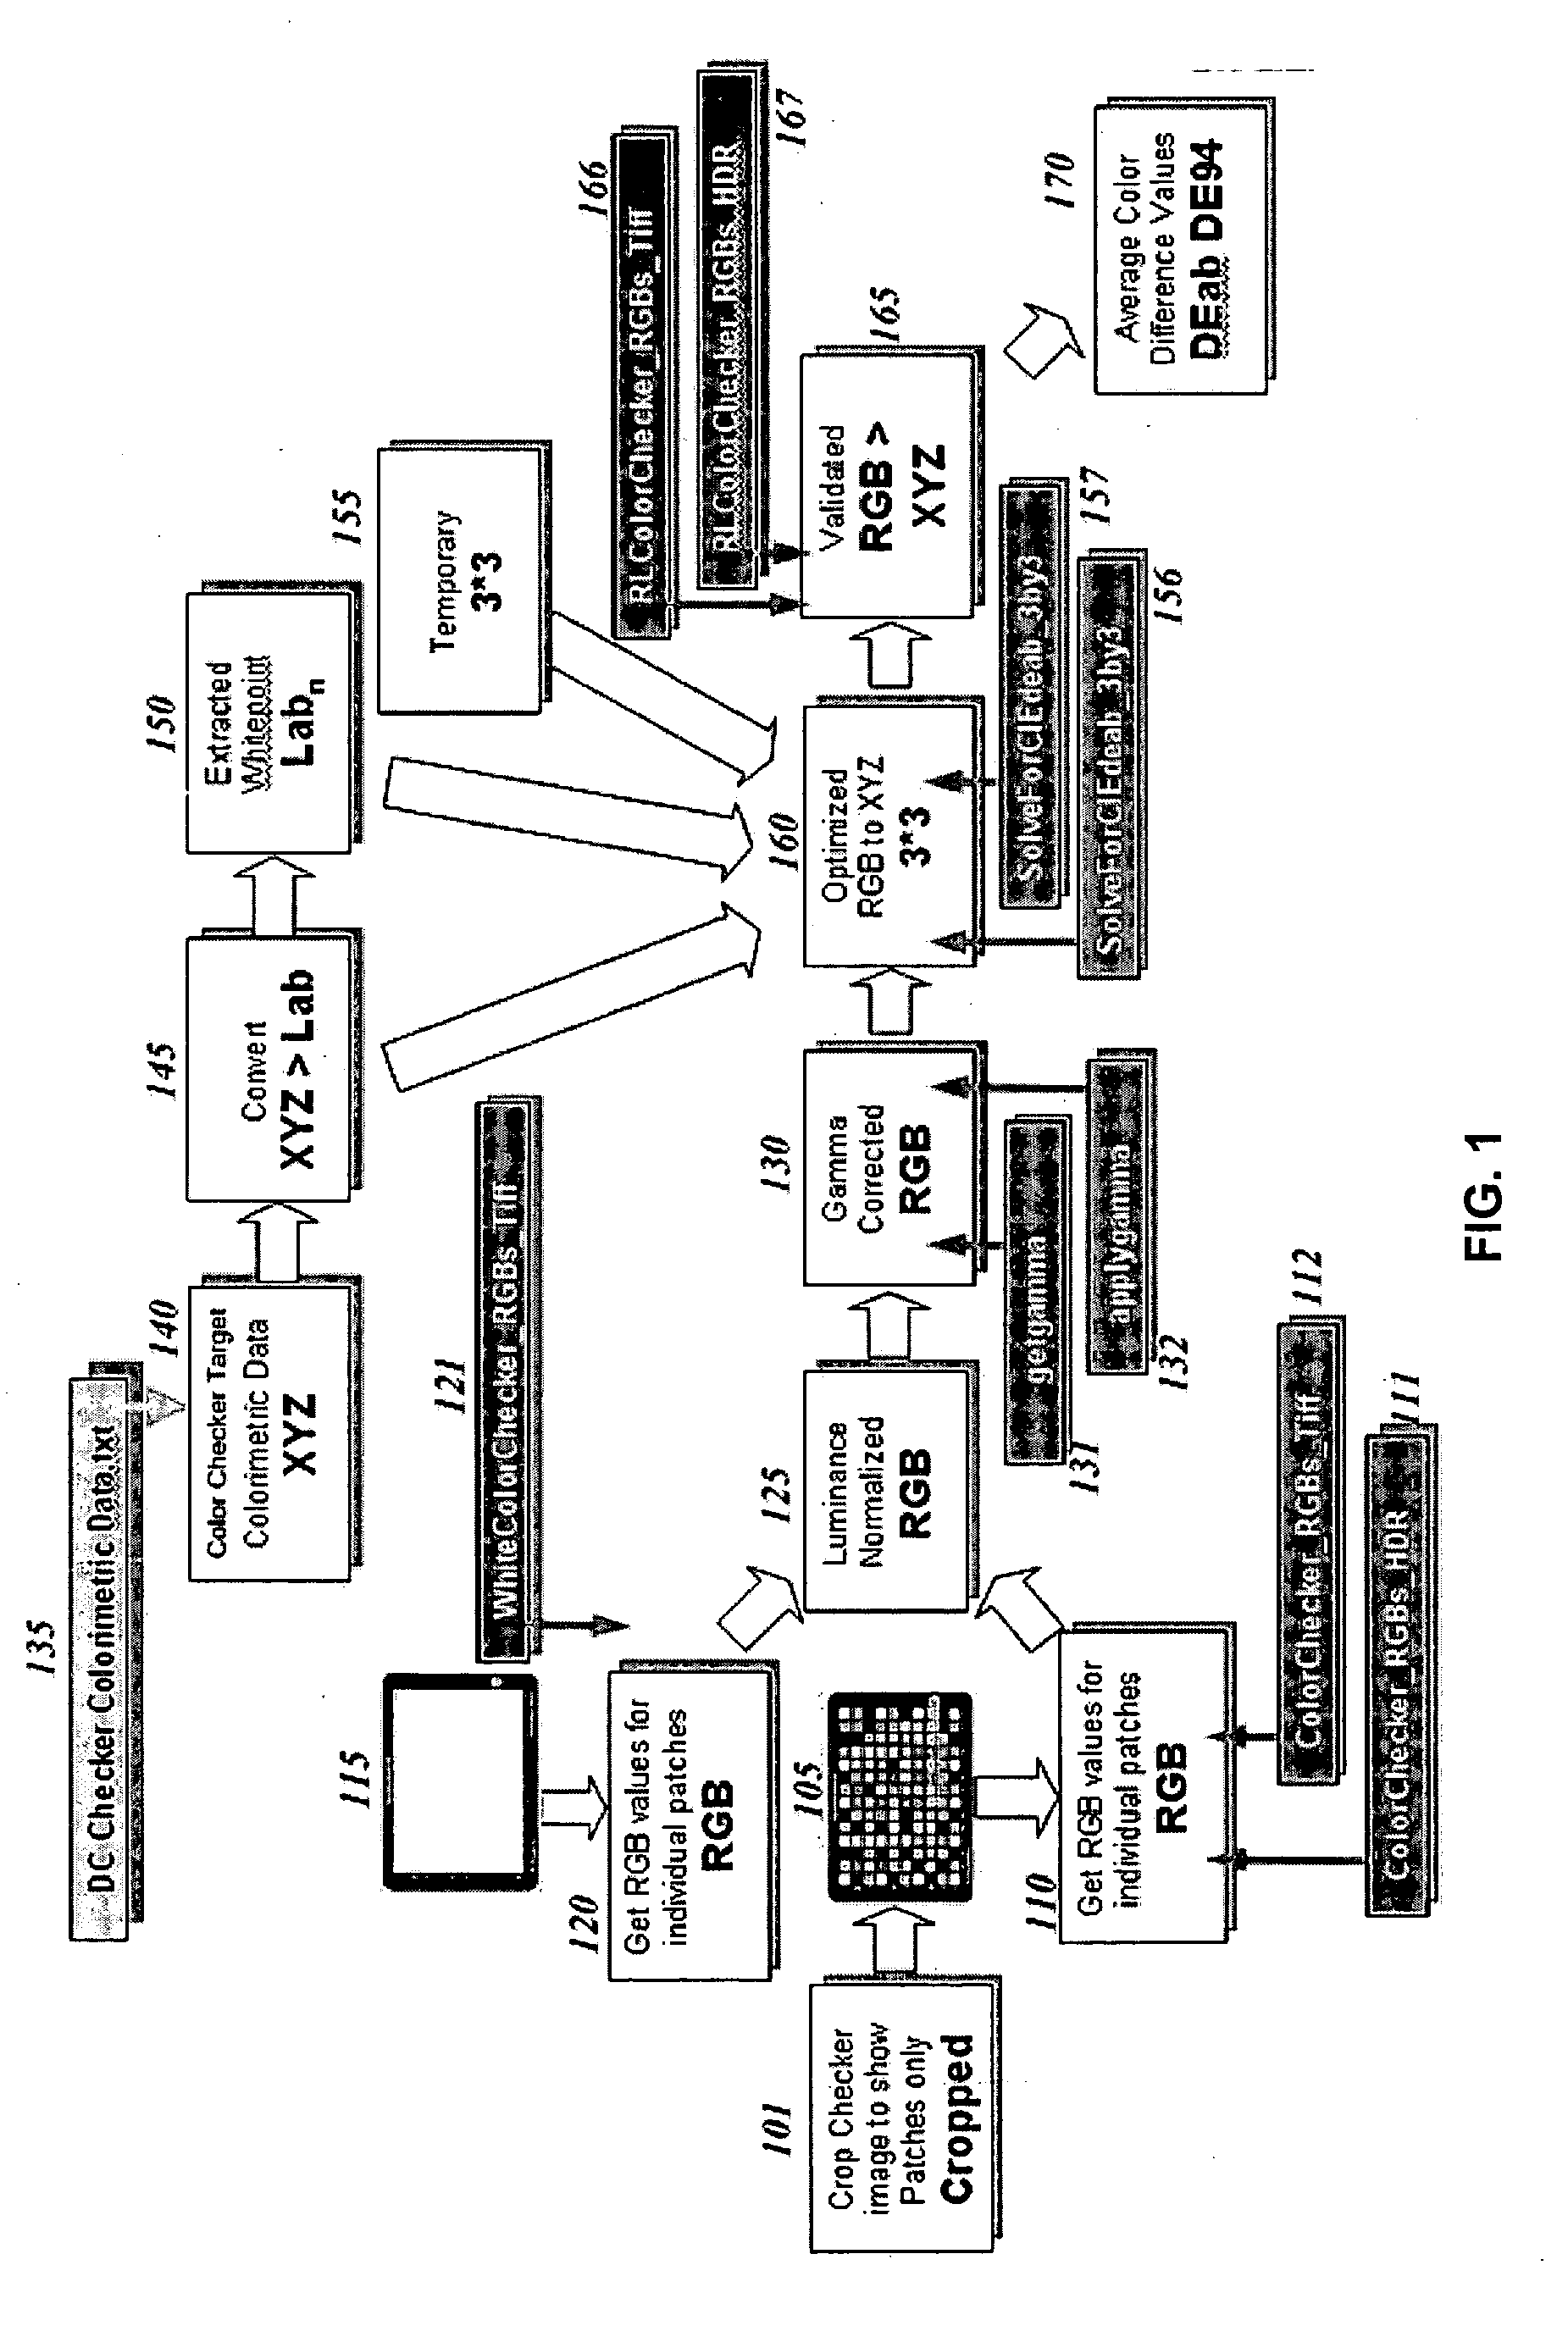 Color characterization of high dynamic range image capture devices